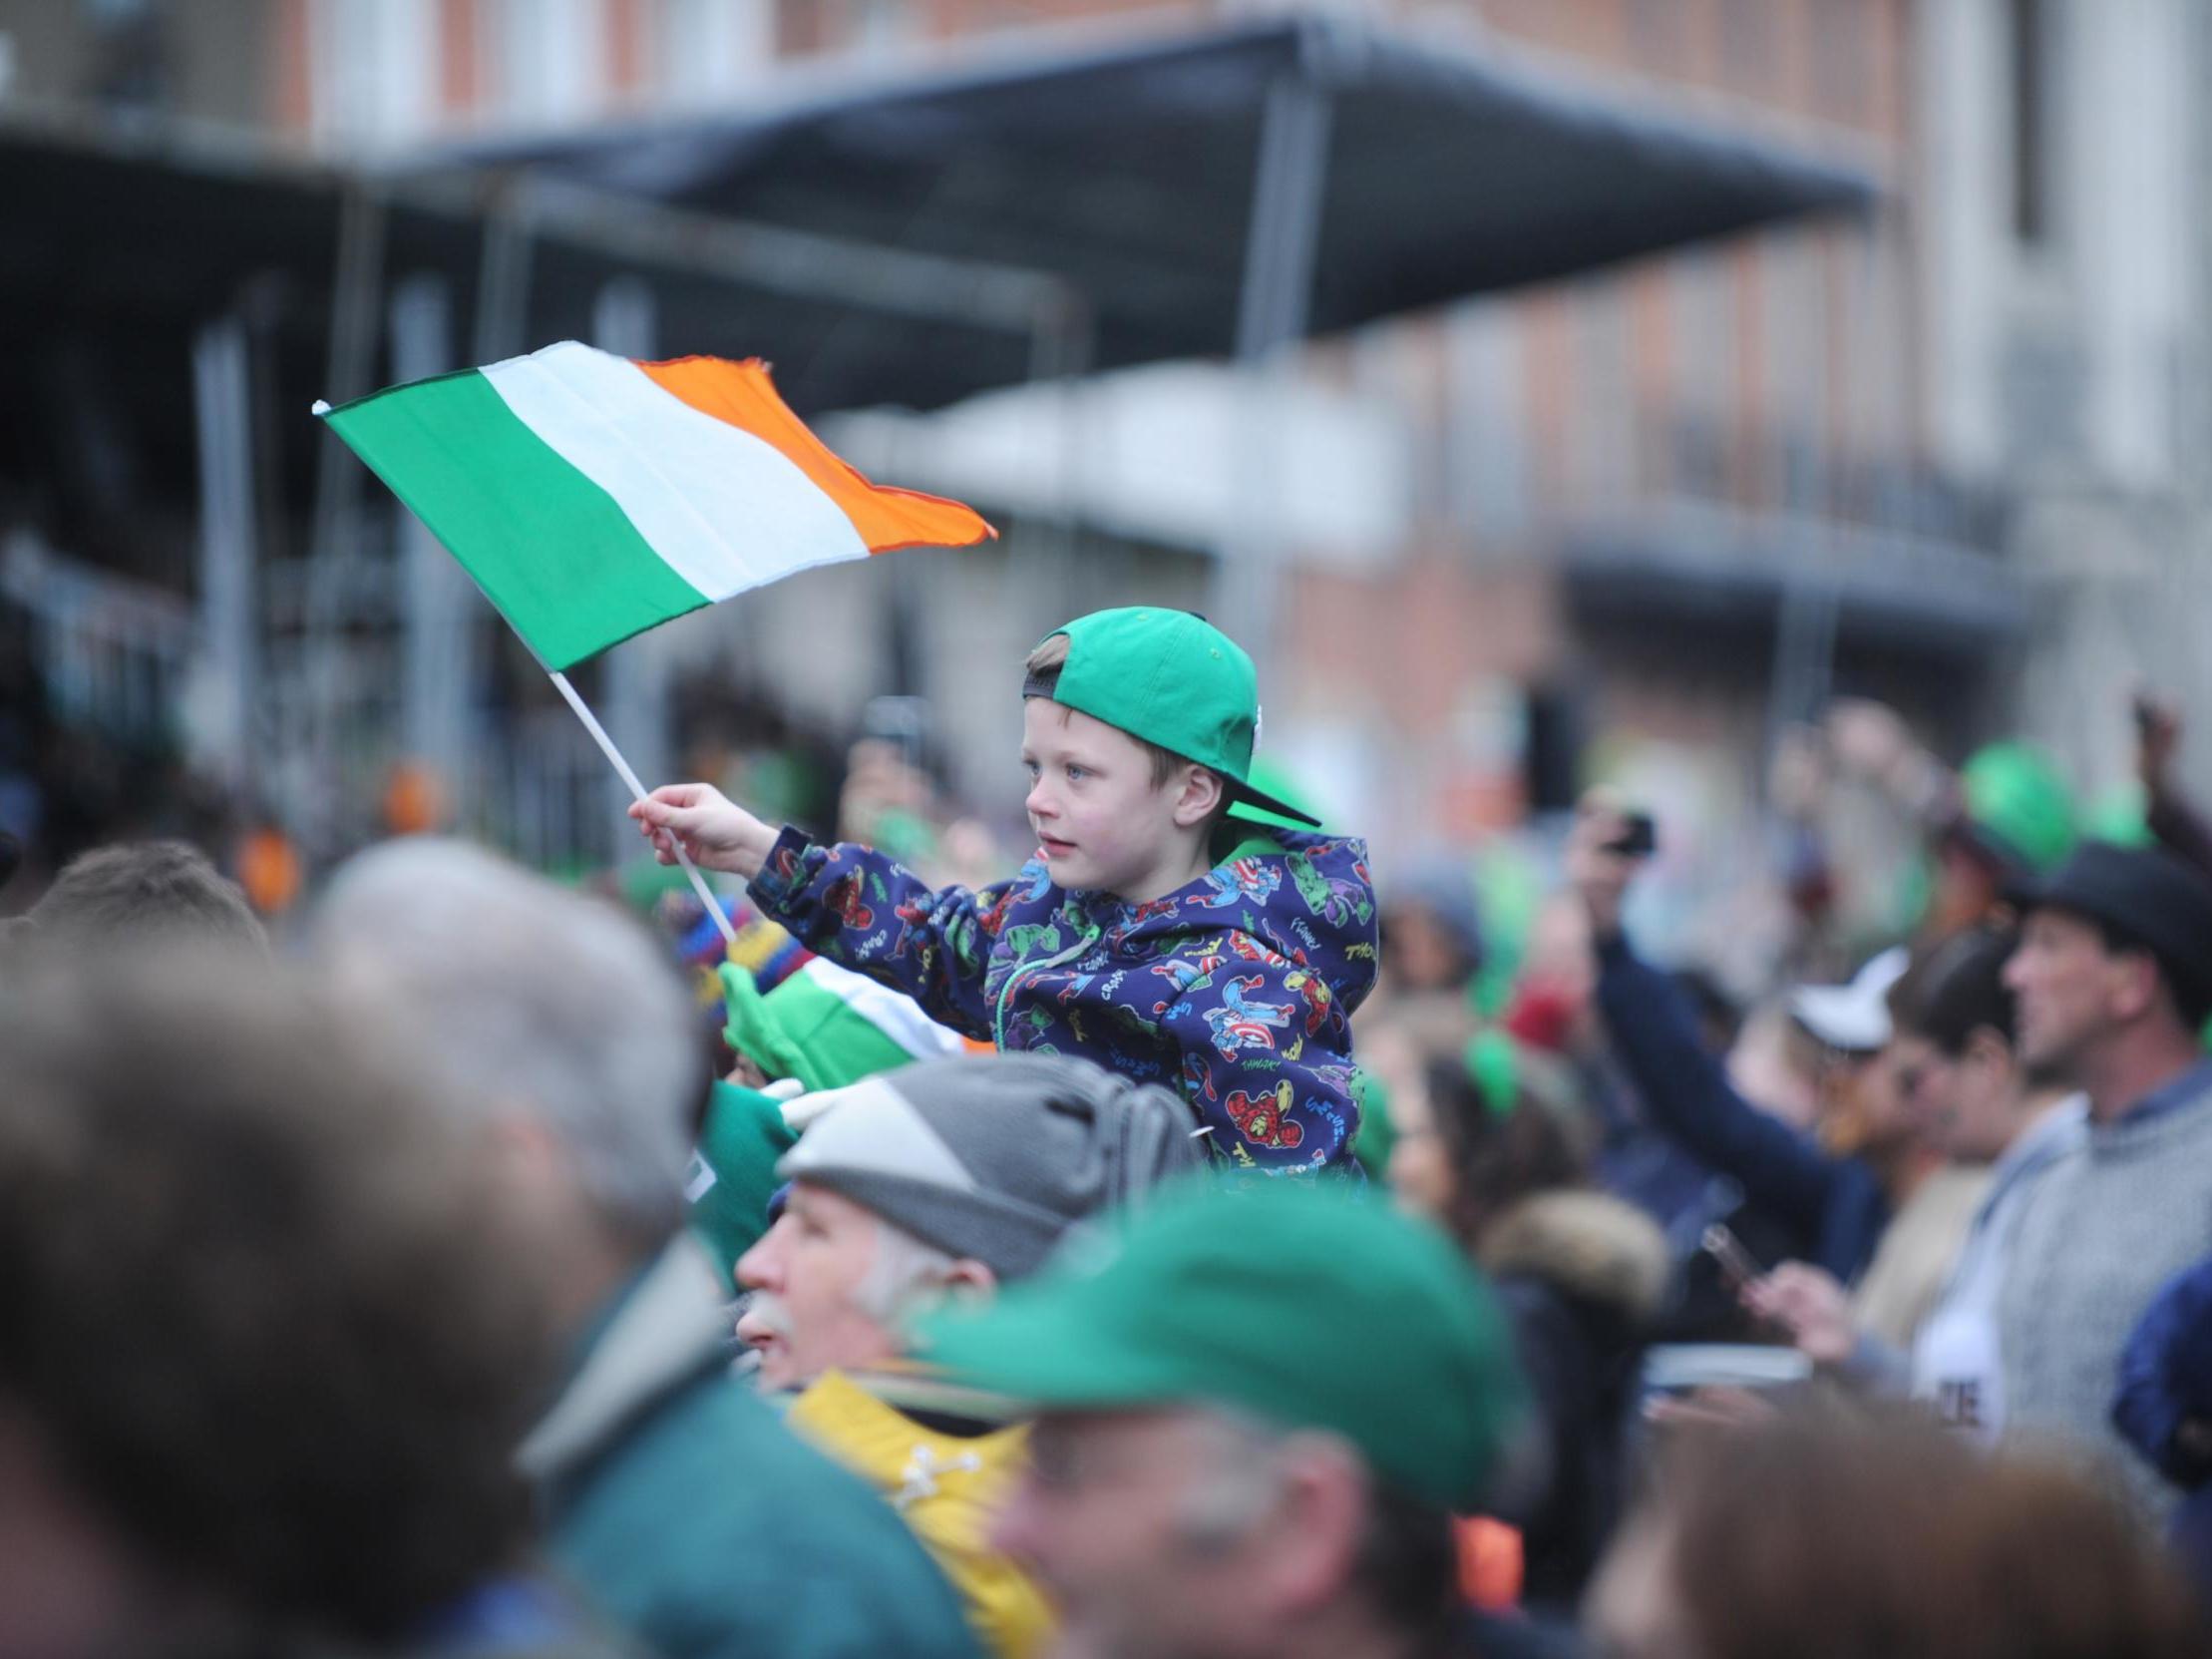 A young boy pictured during the Saint Patrick's Day Parade in Dublin, Ireland, 17 March 2017